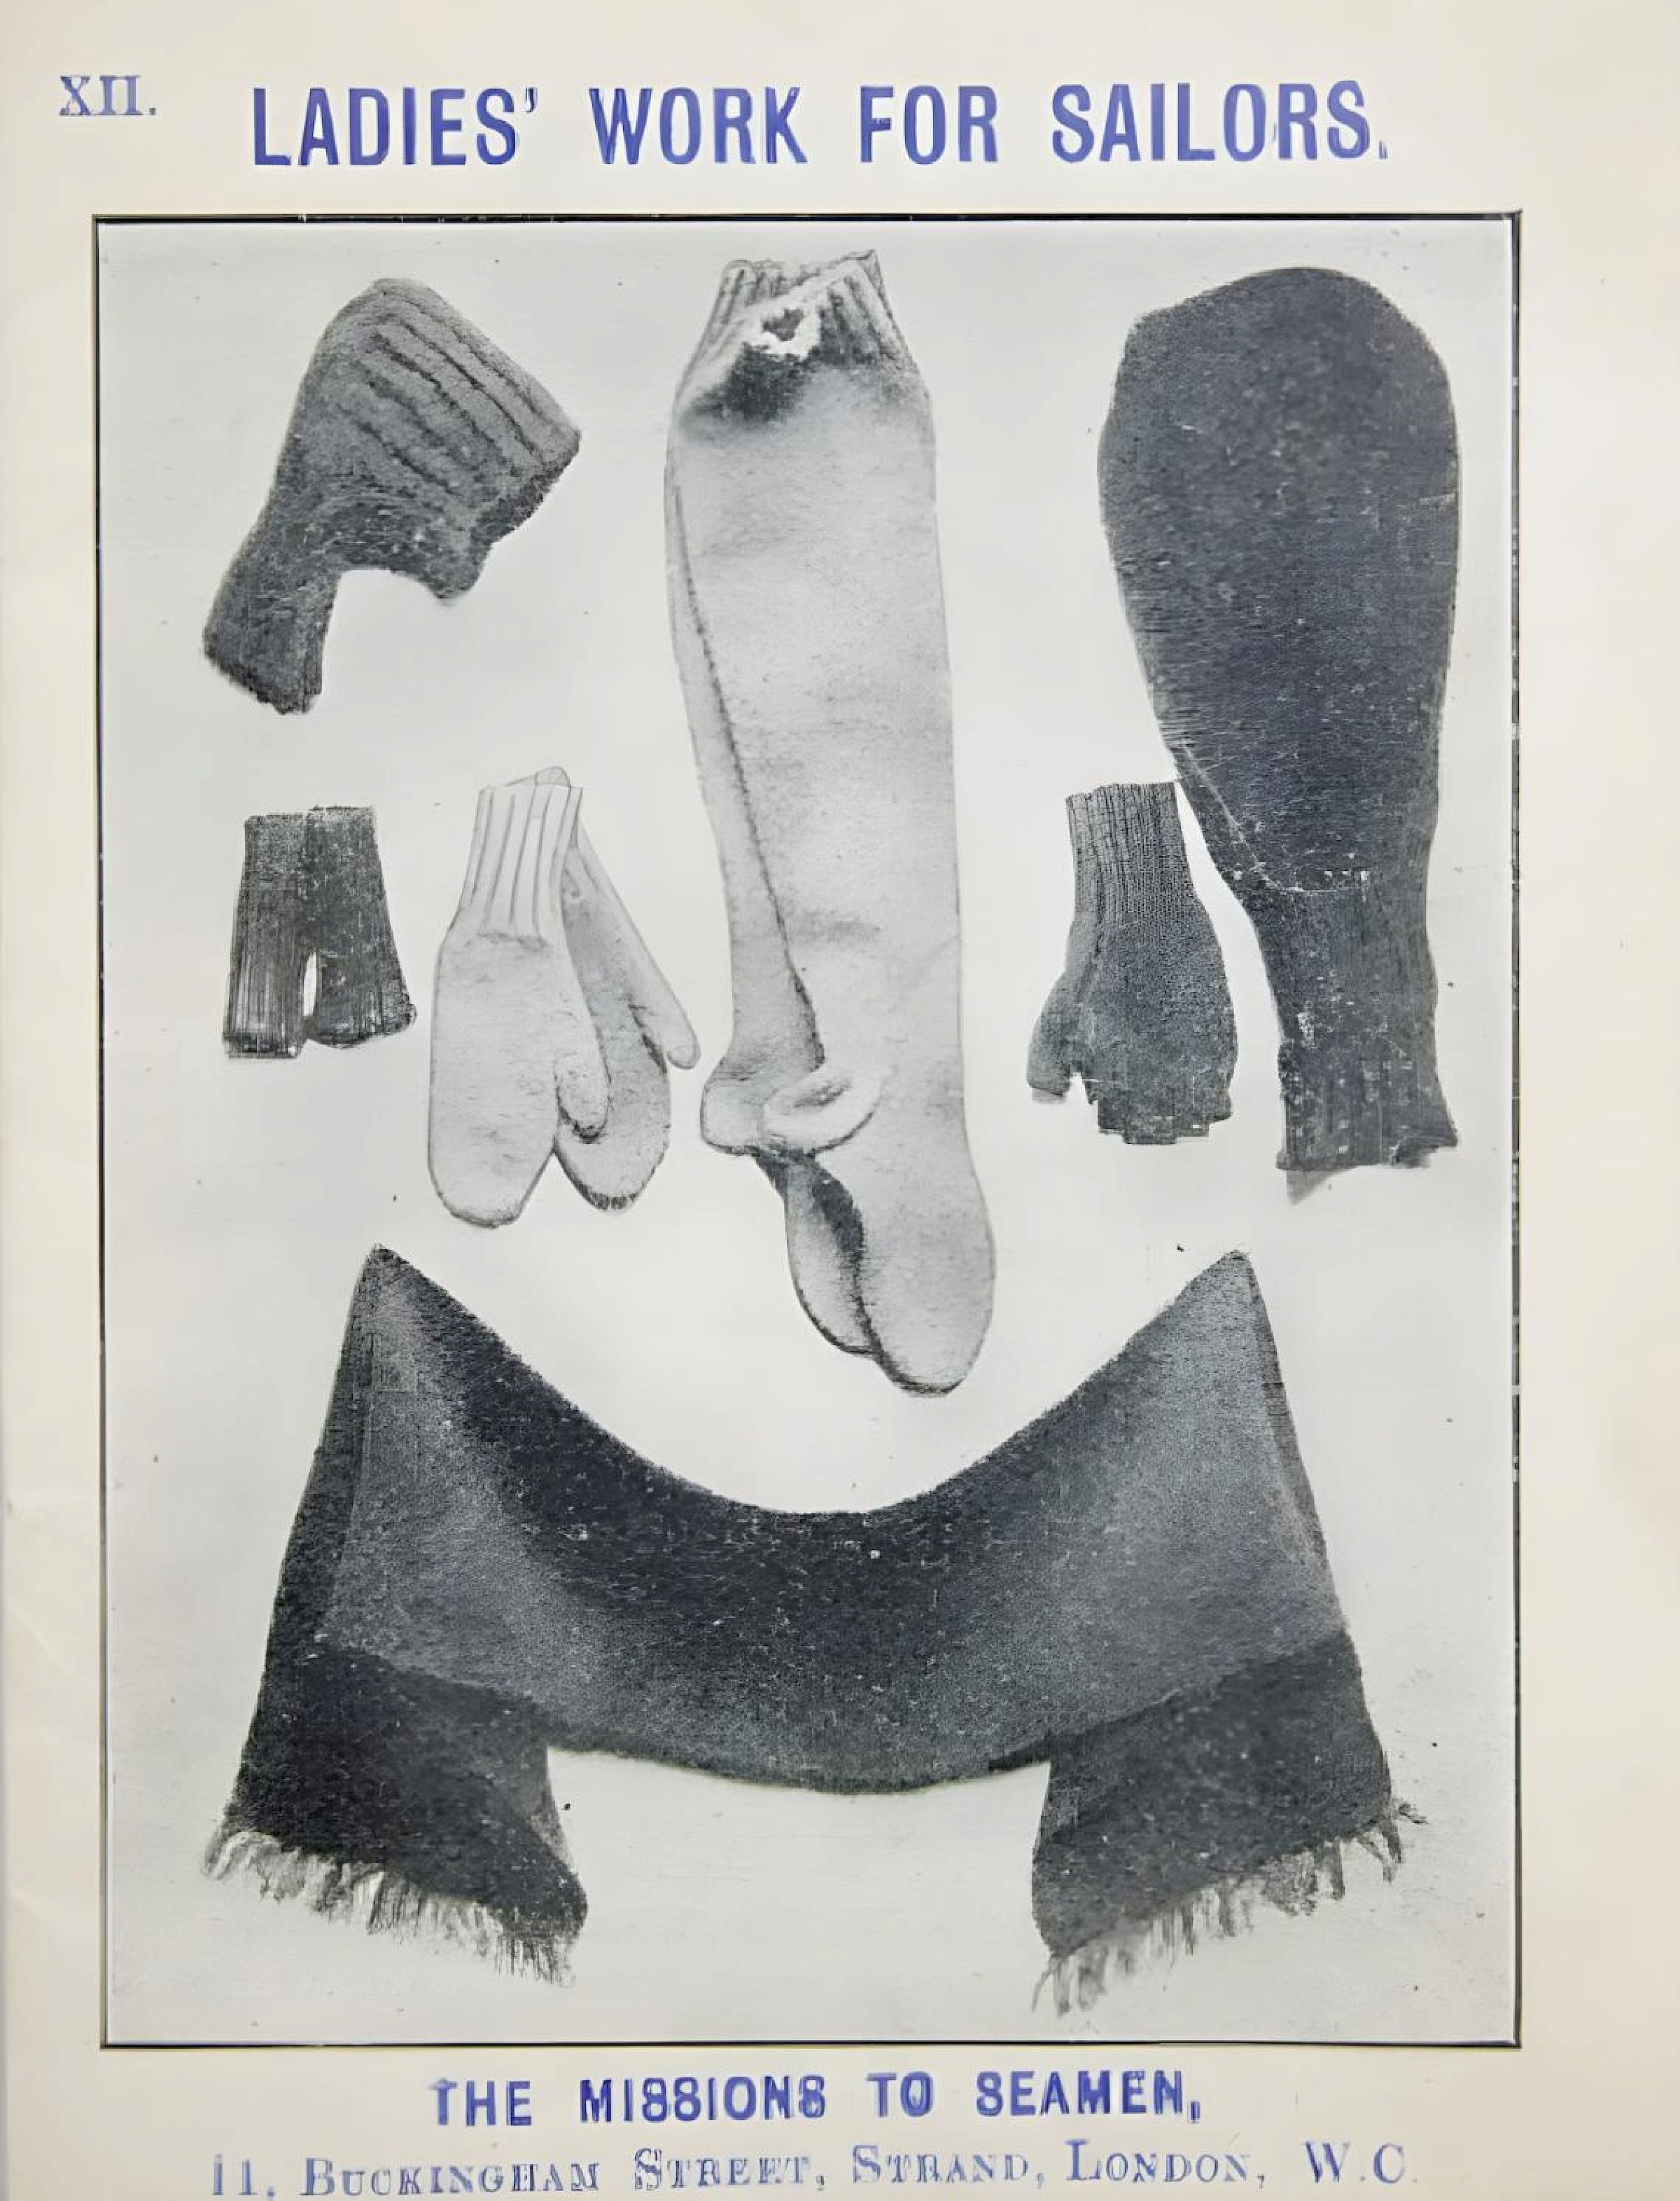 Finished garments for sailors. Source: Ladies Work for Sailors.